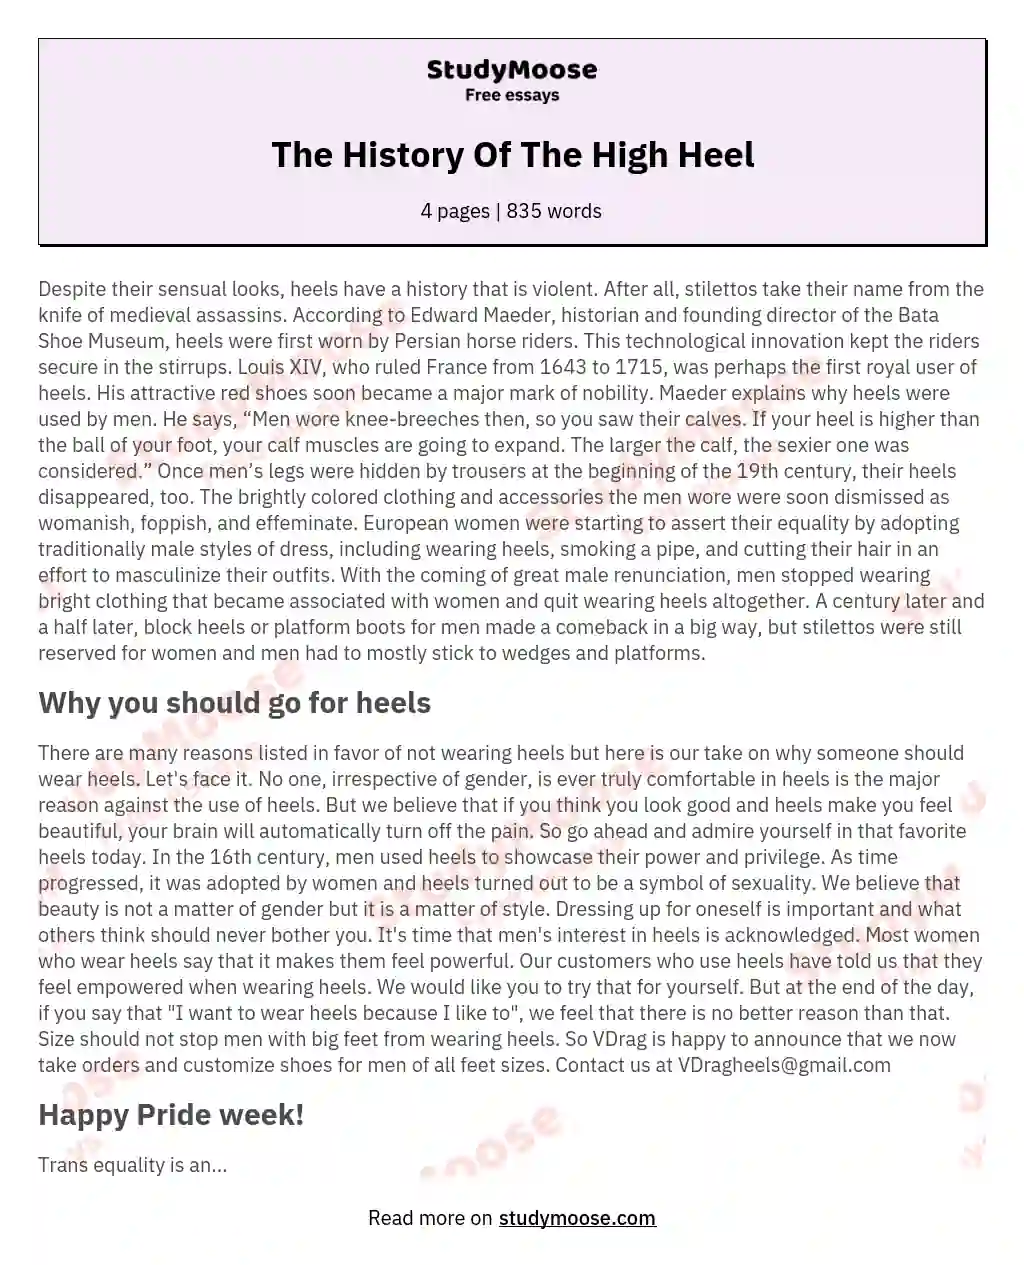 The History Of The High Heel